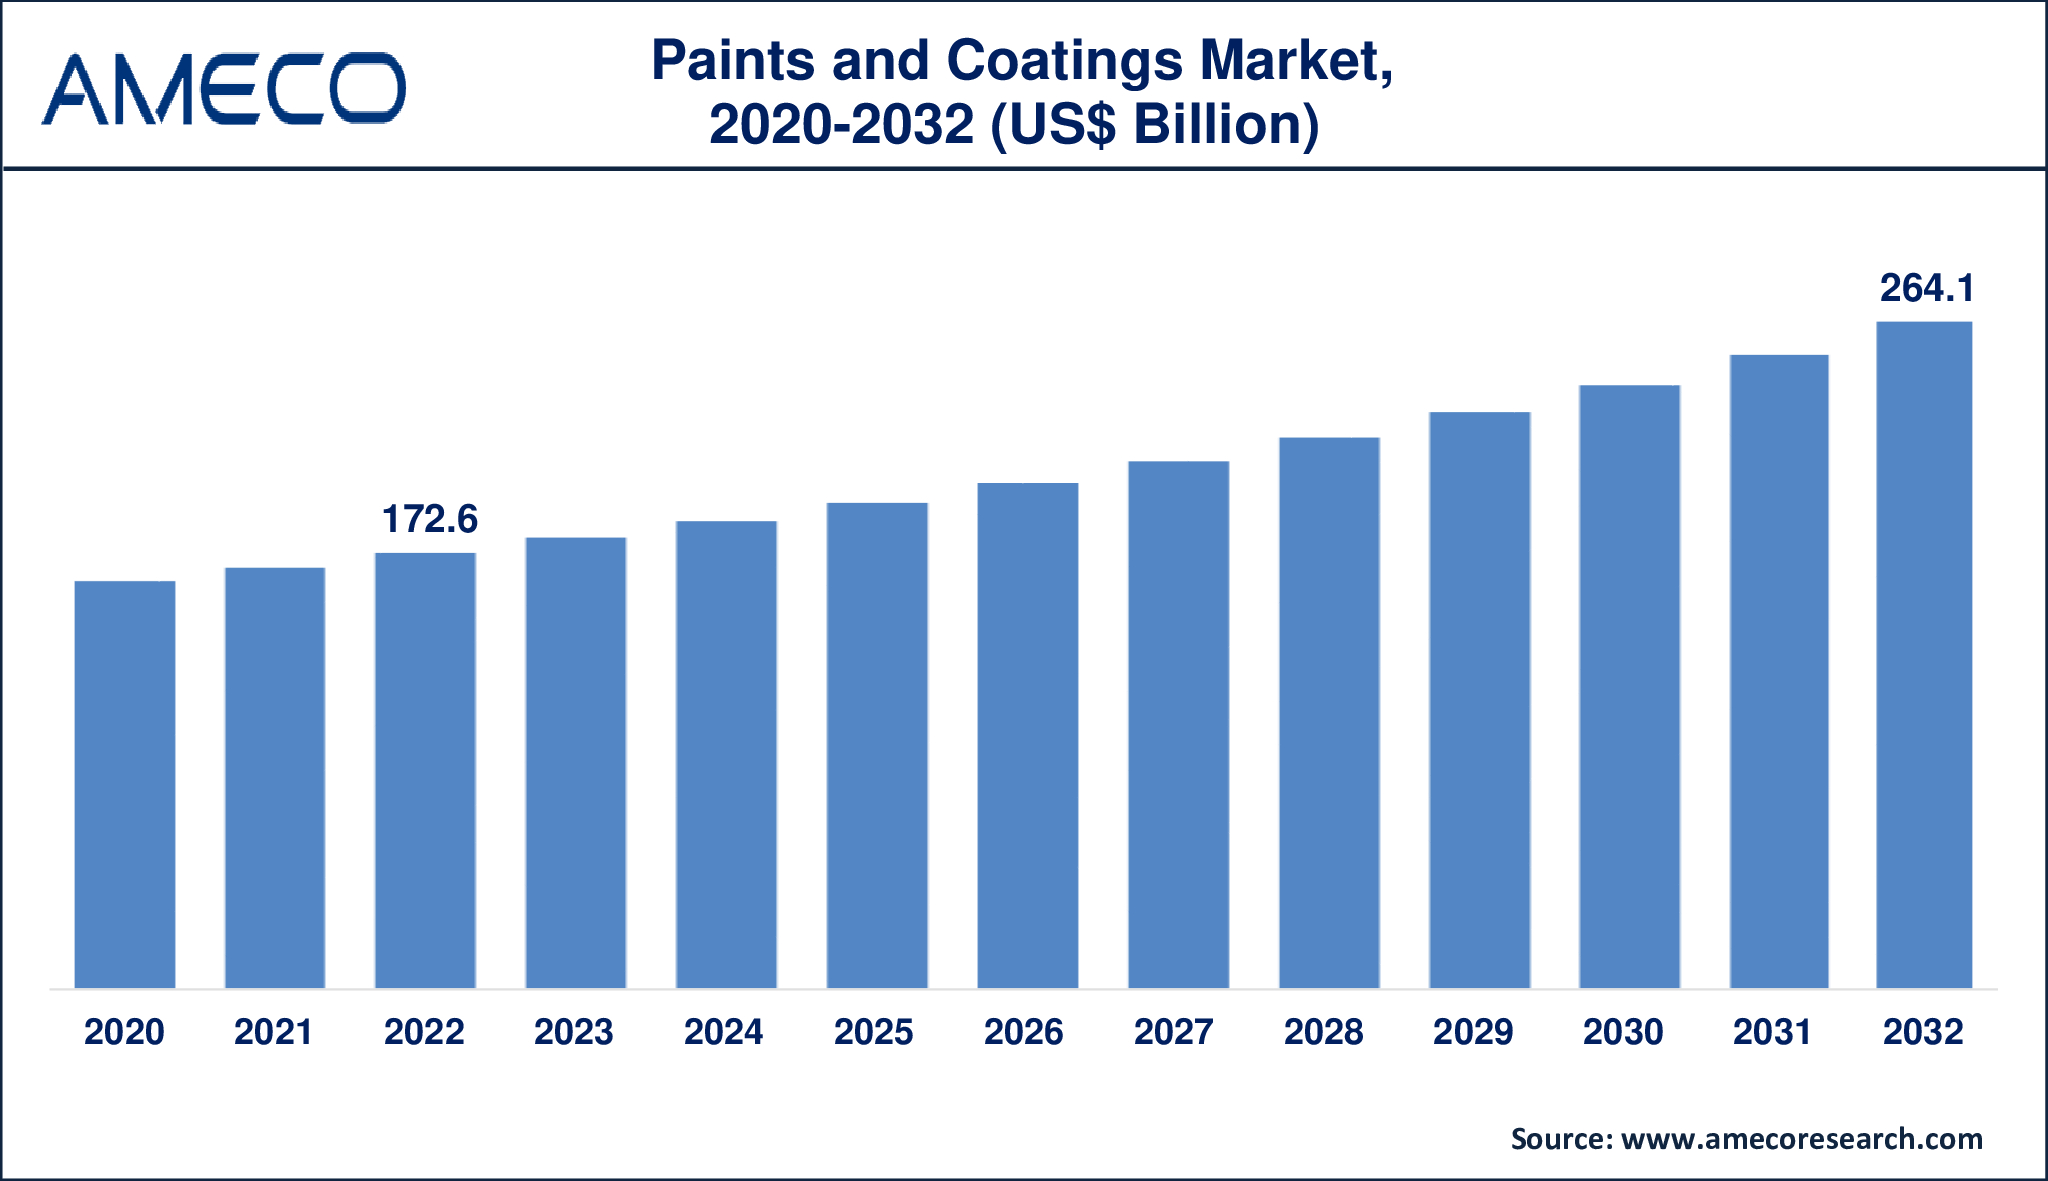 Paints and Coatings Market Dynamics